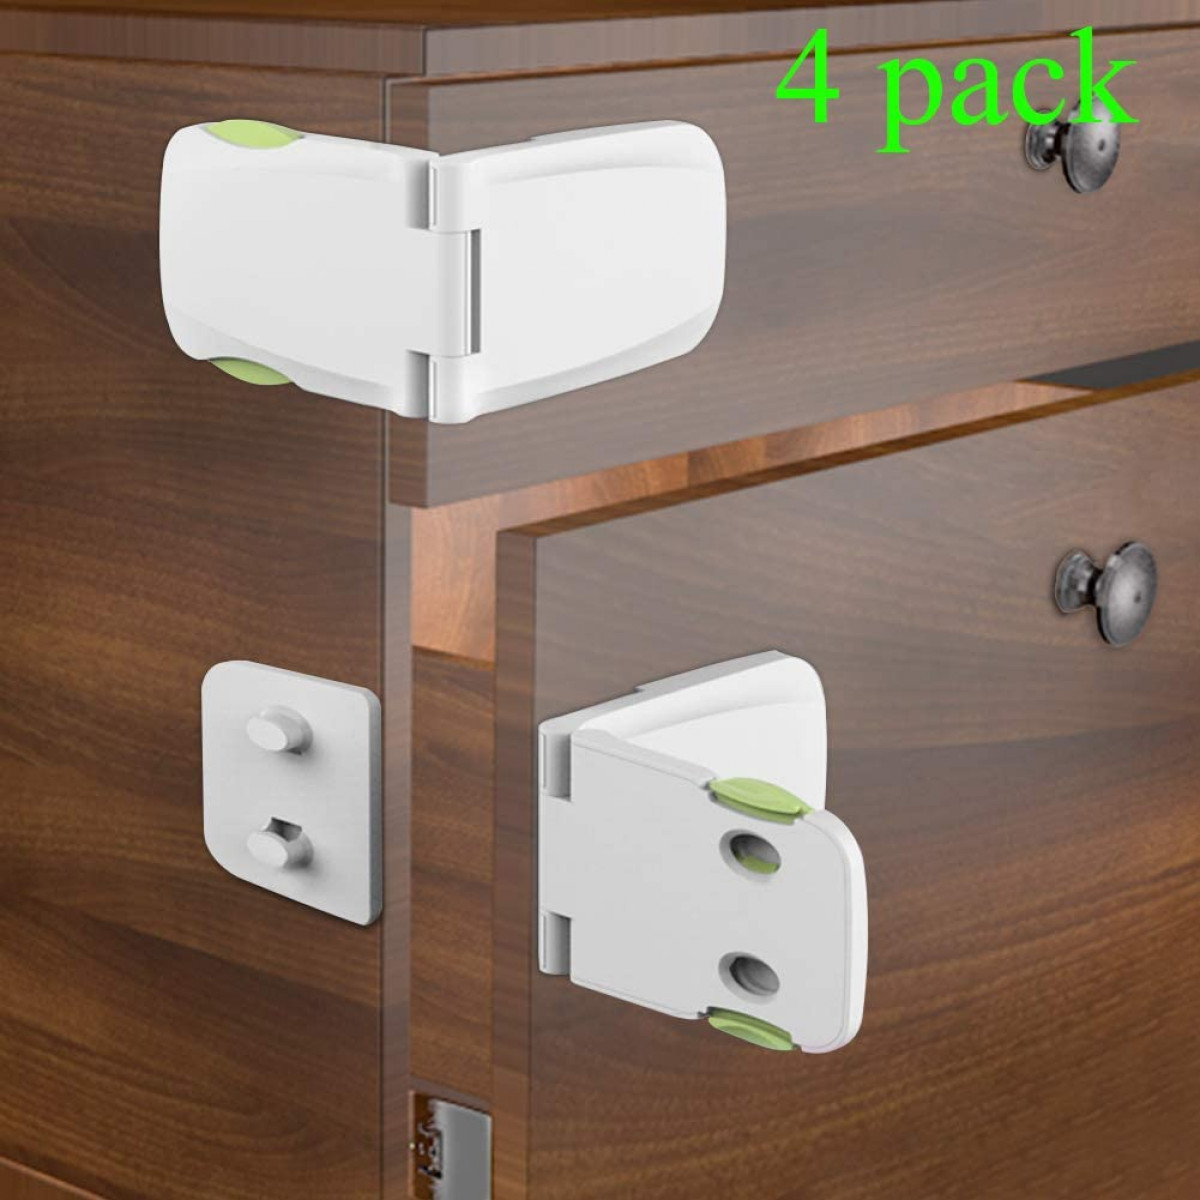 Cabinet Locks, Child Safety Cabinet Latches (8 Pack), Multi-purpose For  Cabinets, Drawers, Fridge, Oven, Easy To Use, White